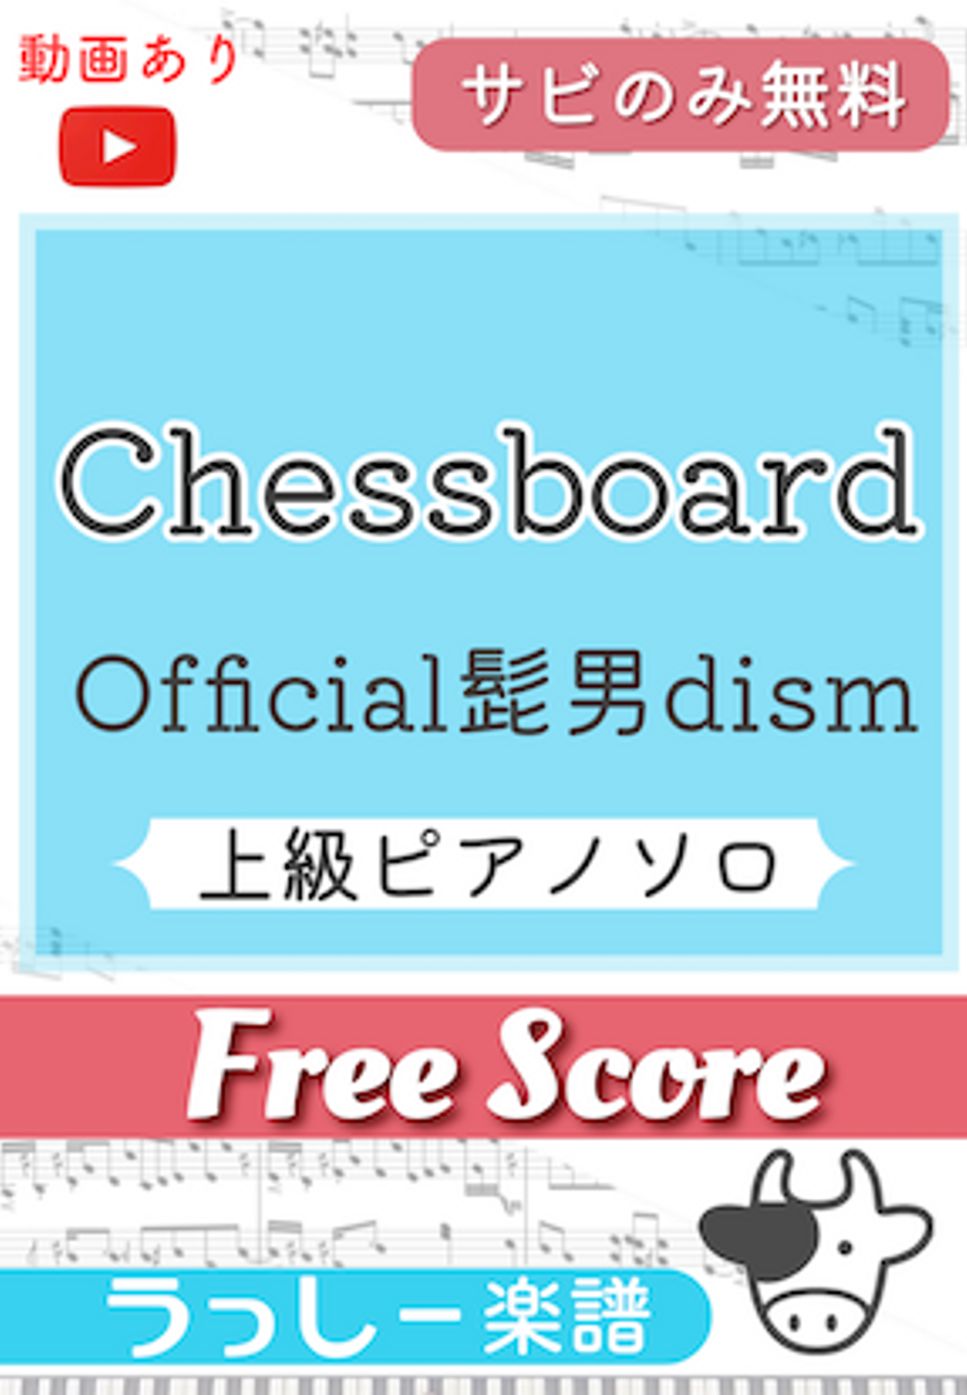 Official髭男dism - Chessboard (サビのみ無料) by 牛武奏人